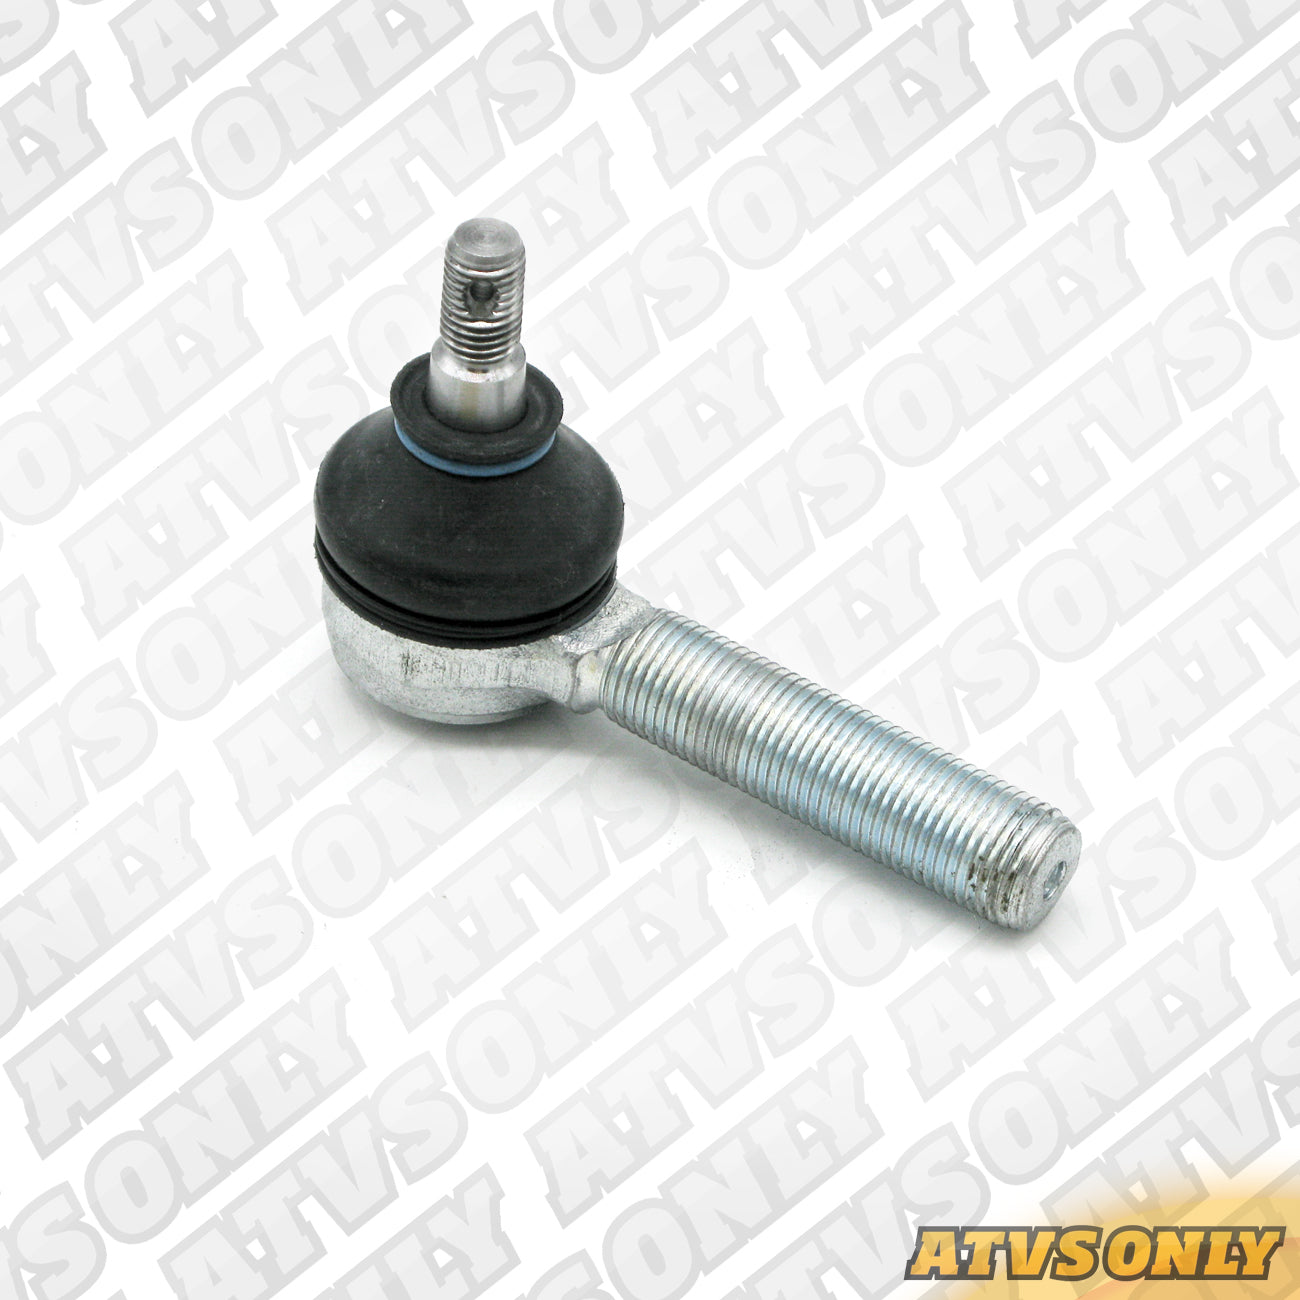 A-Arm Ball Joint (Lonestar – Upper/Lower) for Yamaha Applications